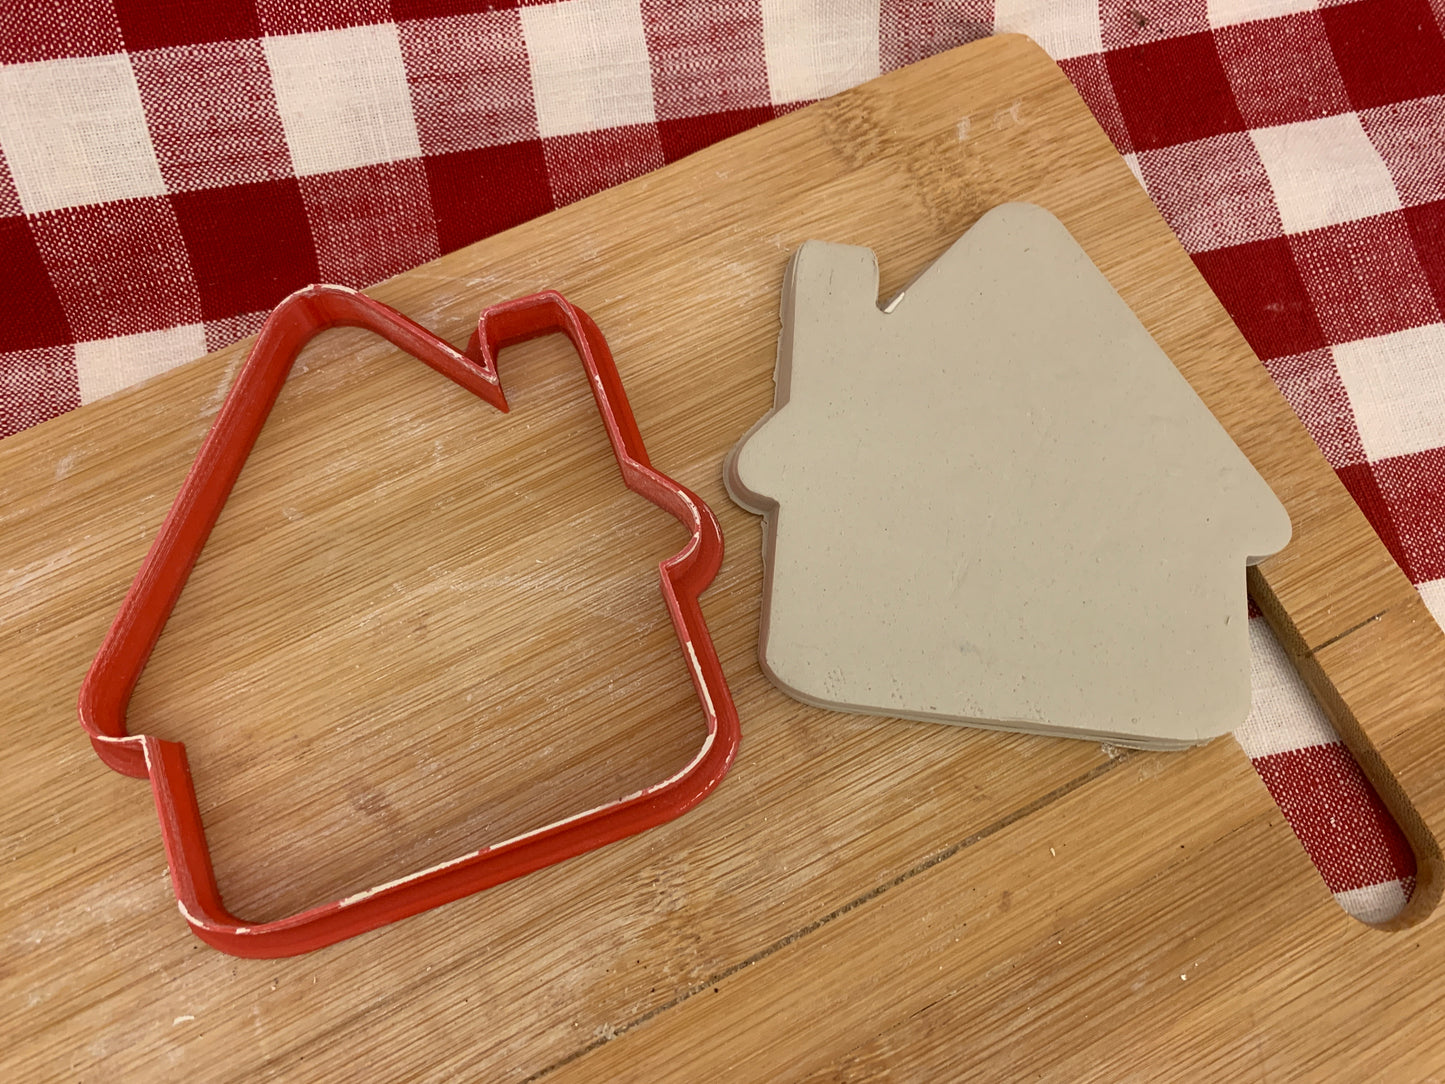 Christmas Ornament House Clay Cutter, pottery tool - multiple sizes Sizes Available